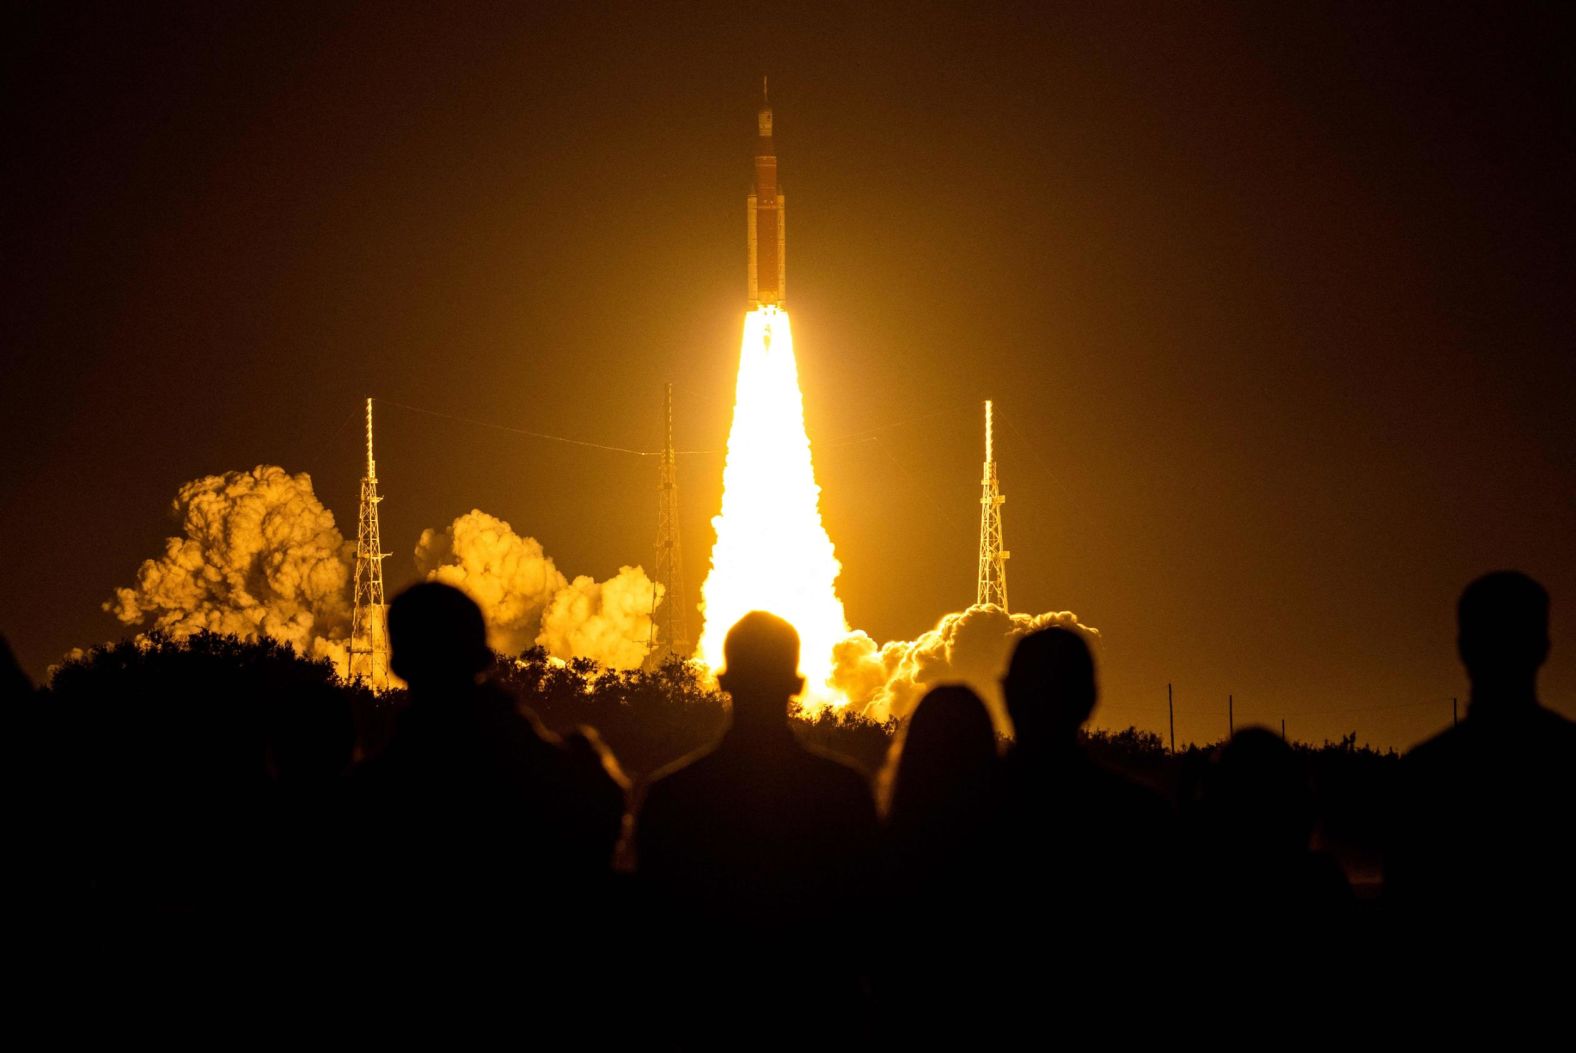 Spectators cheer as the Artemis I rocket lifts off from NASA's Kennedy Space Center in Cape Canaveral, Florida, on November 16.